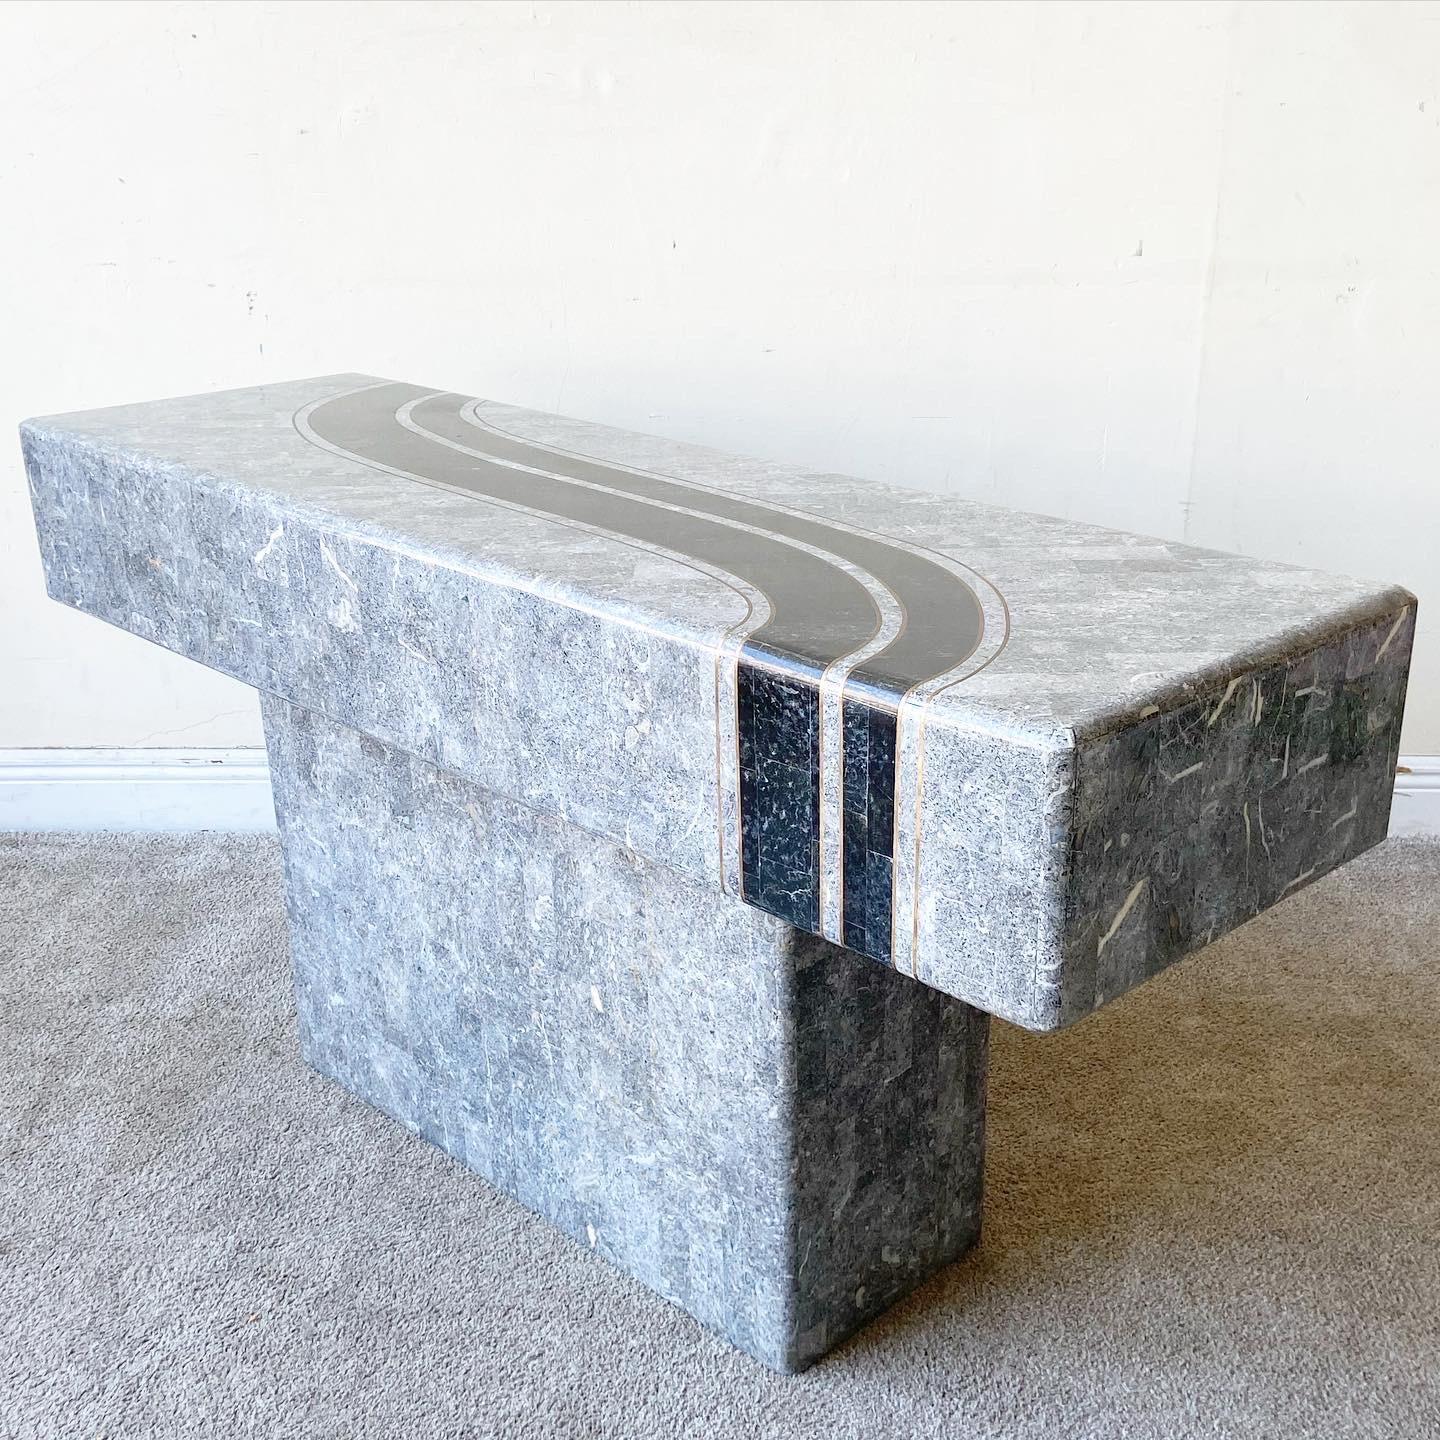 Exceptional postmodern tessellated stone console table. Features a polished black and grey stone.
 